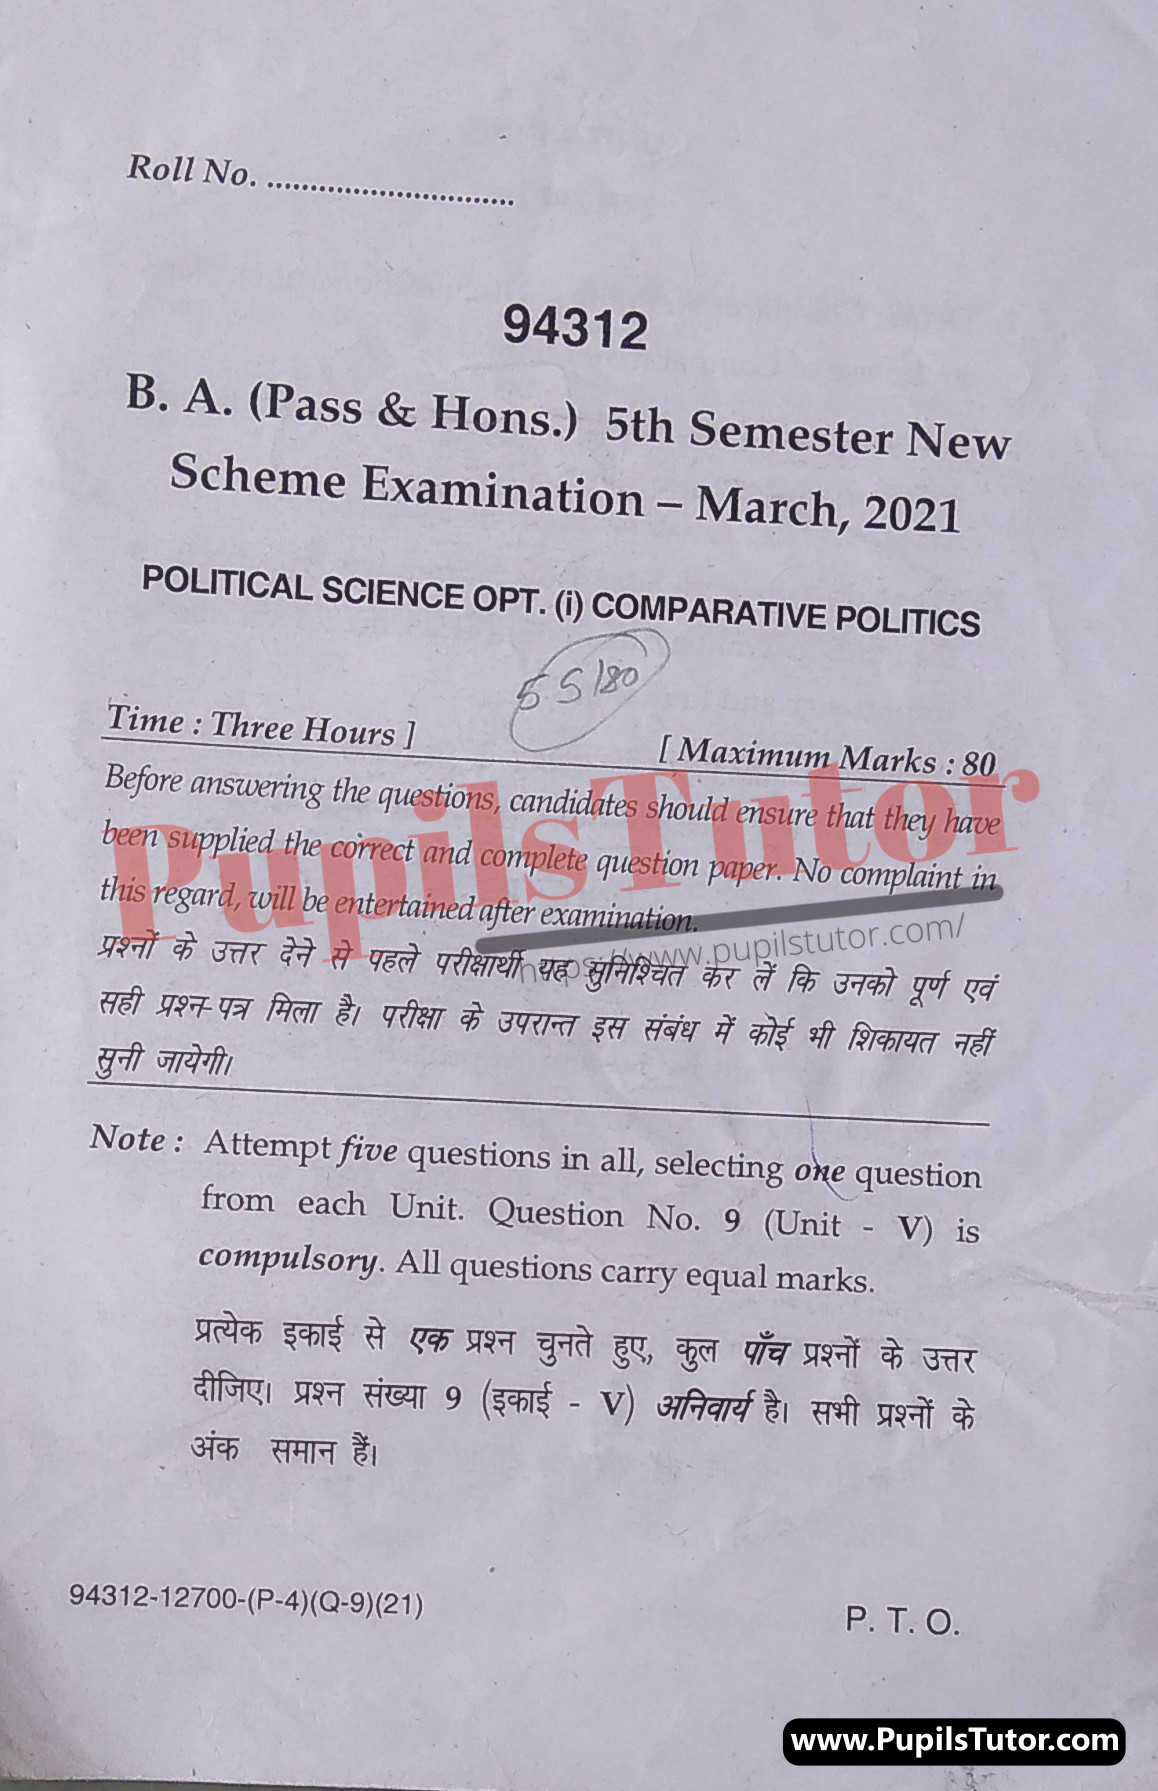 MDU (Maharshi Dayanand University, Rohtak Haryana) BA Pass Course And Honors 5th Semester Previous Year Political Science Question Paper For March,2021 Exam (Question Paper Page 1) - pupilstutor.com